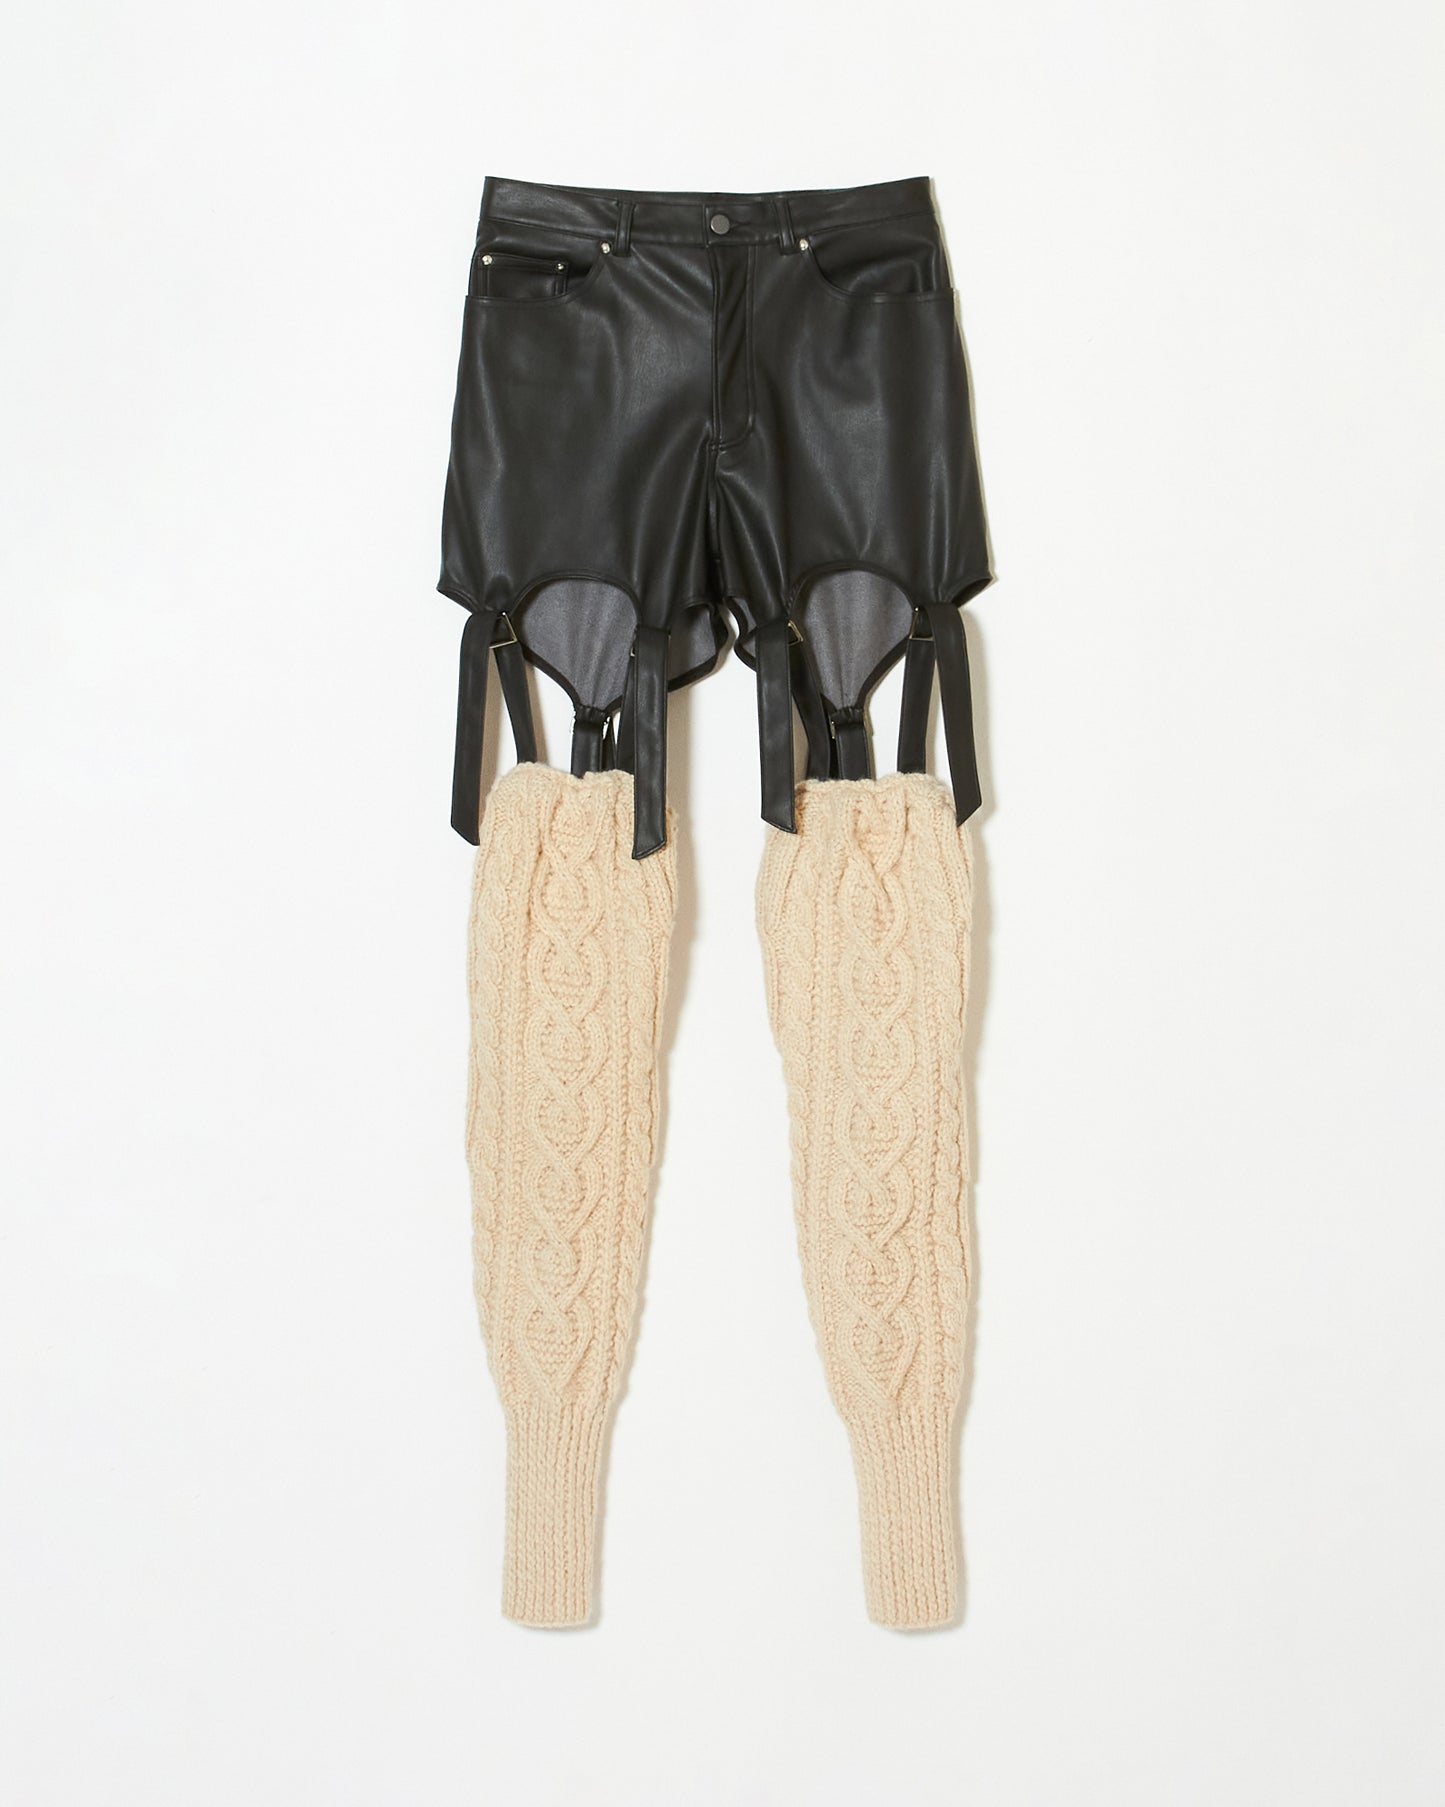 cable knit leather pants【Delivery in March 2023】